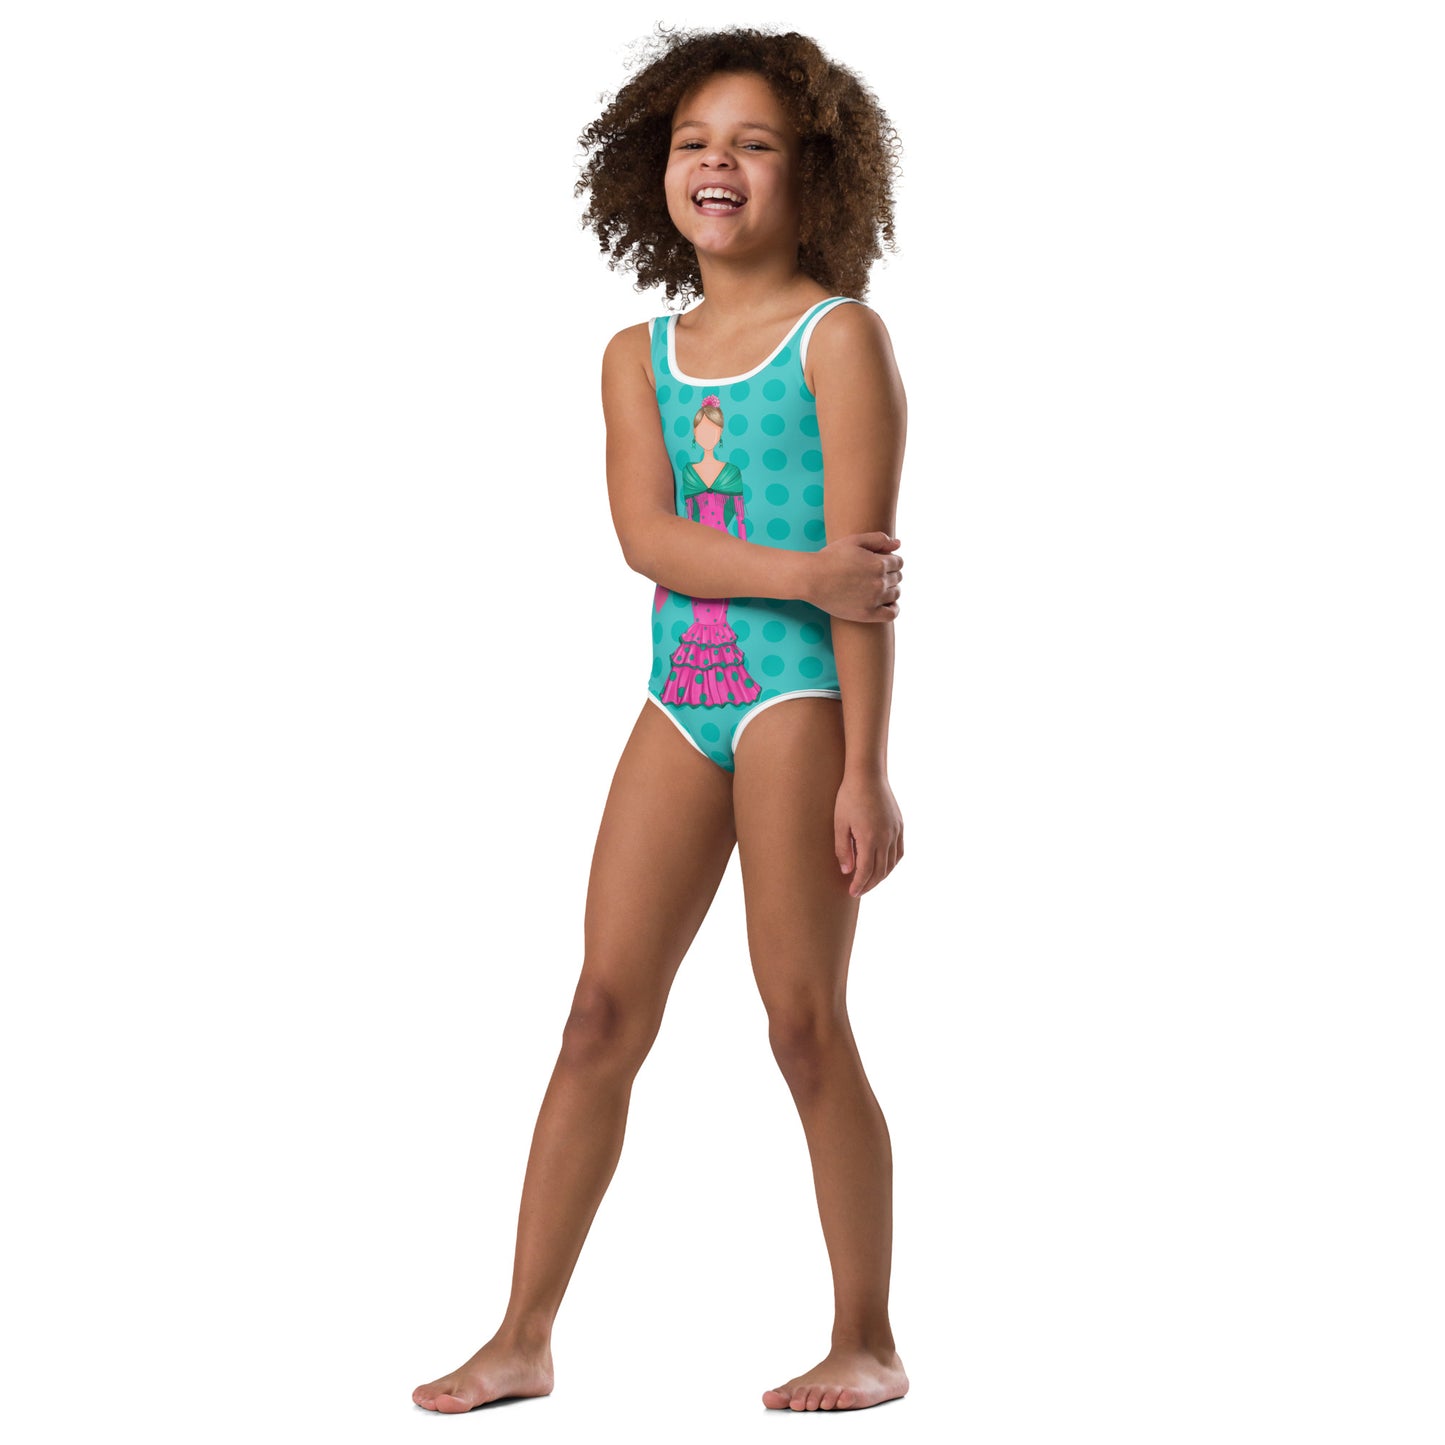 a little girl in a blue and pink swimsuit